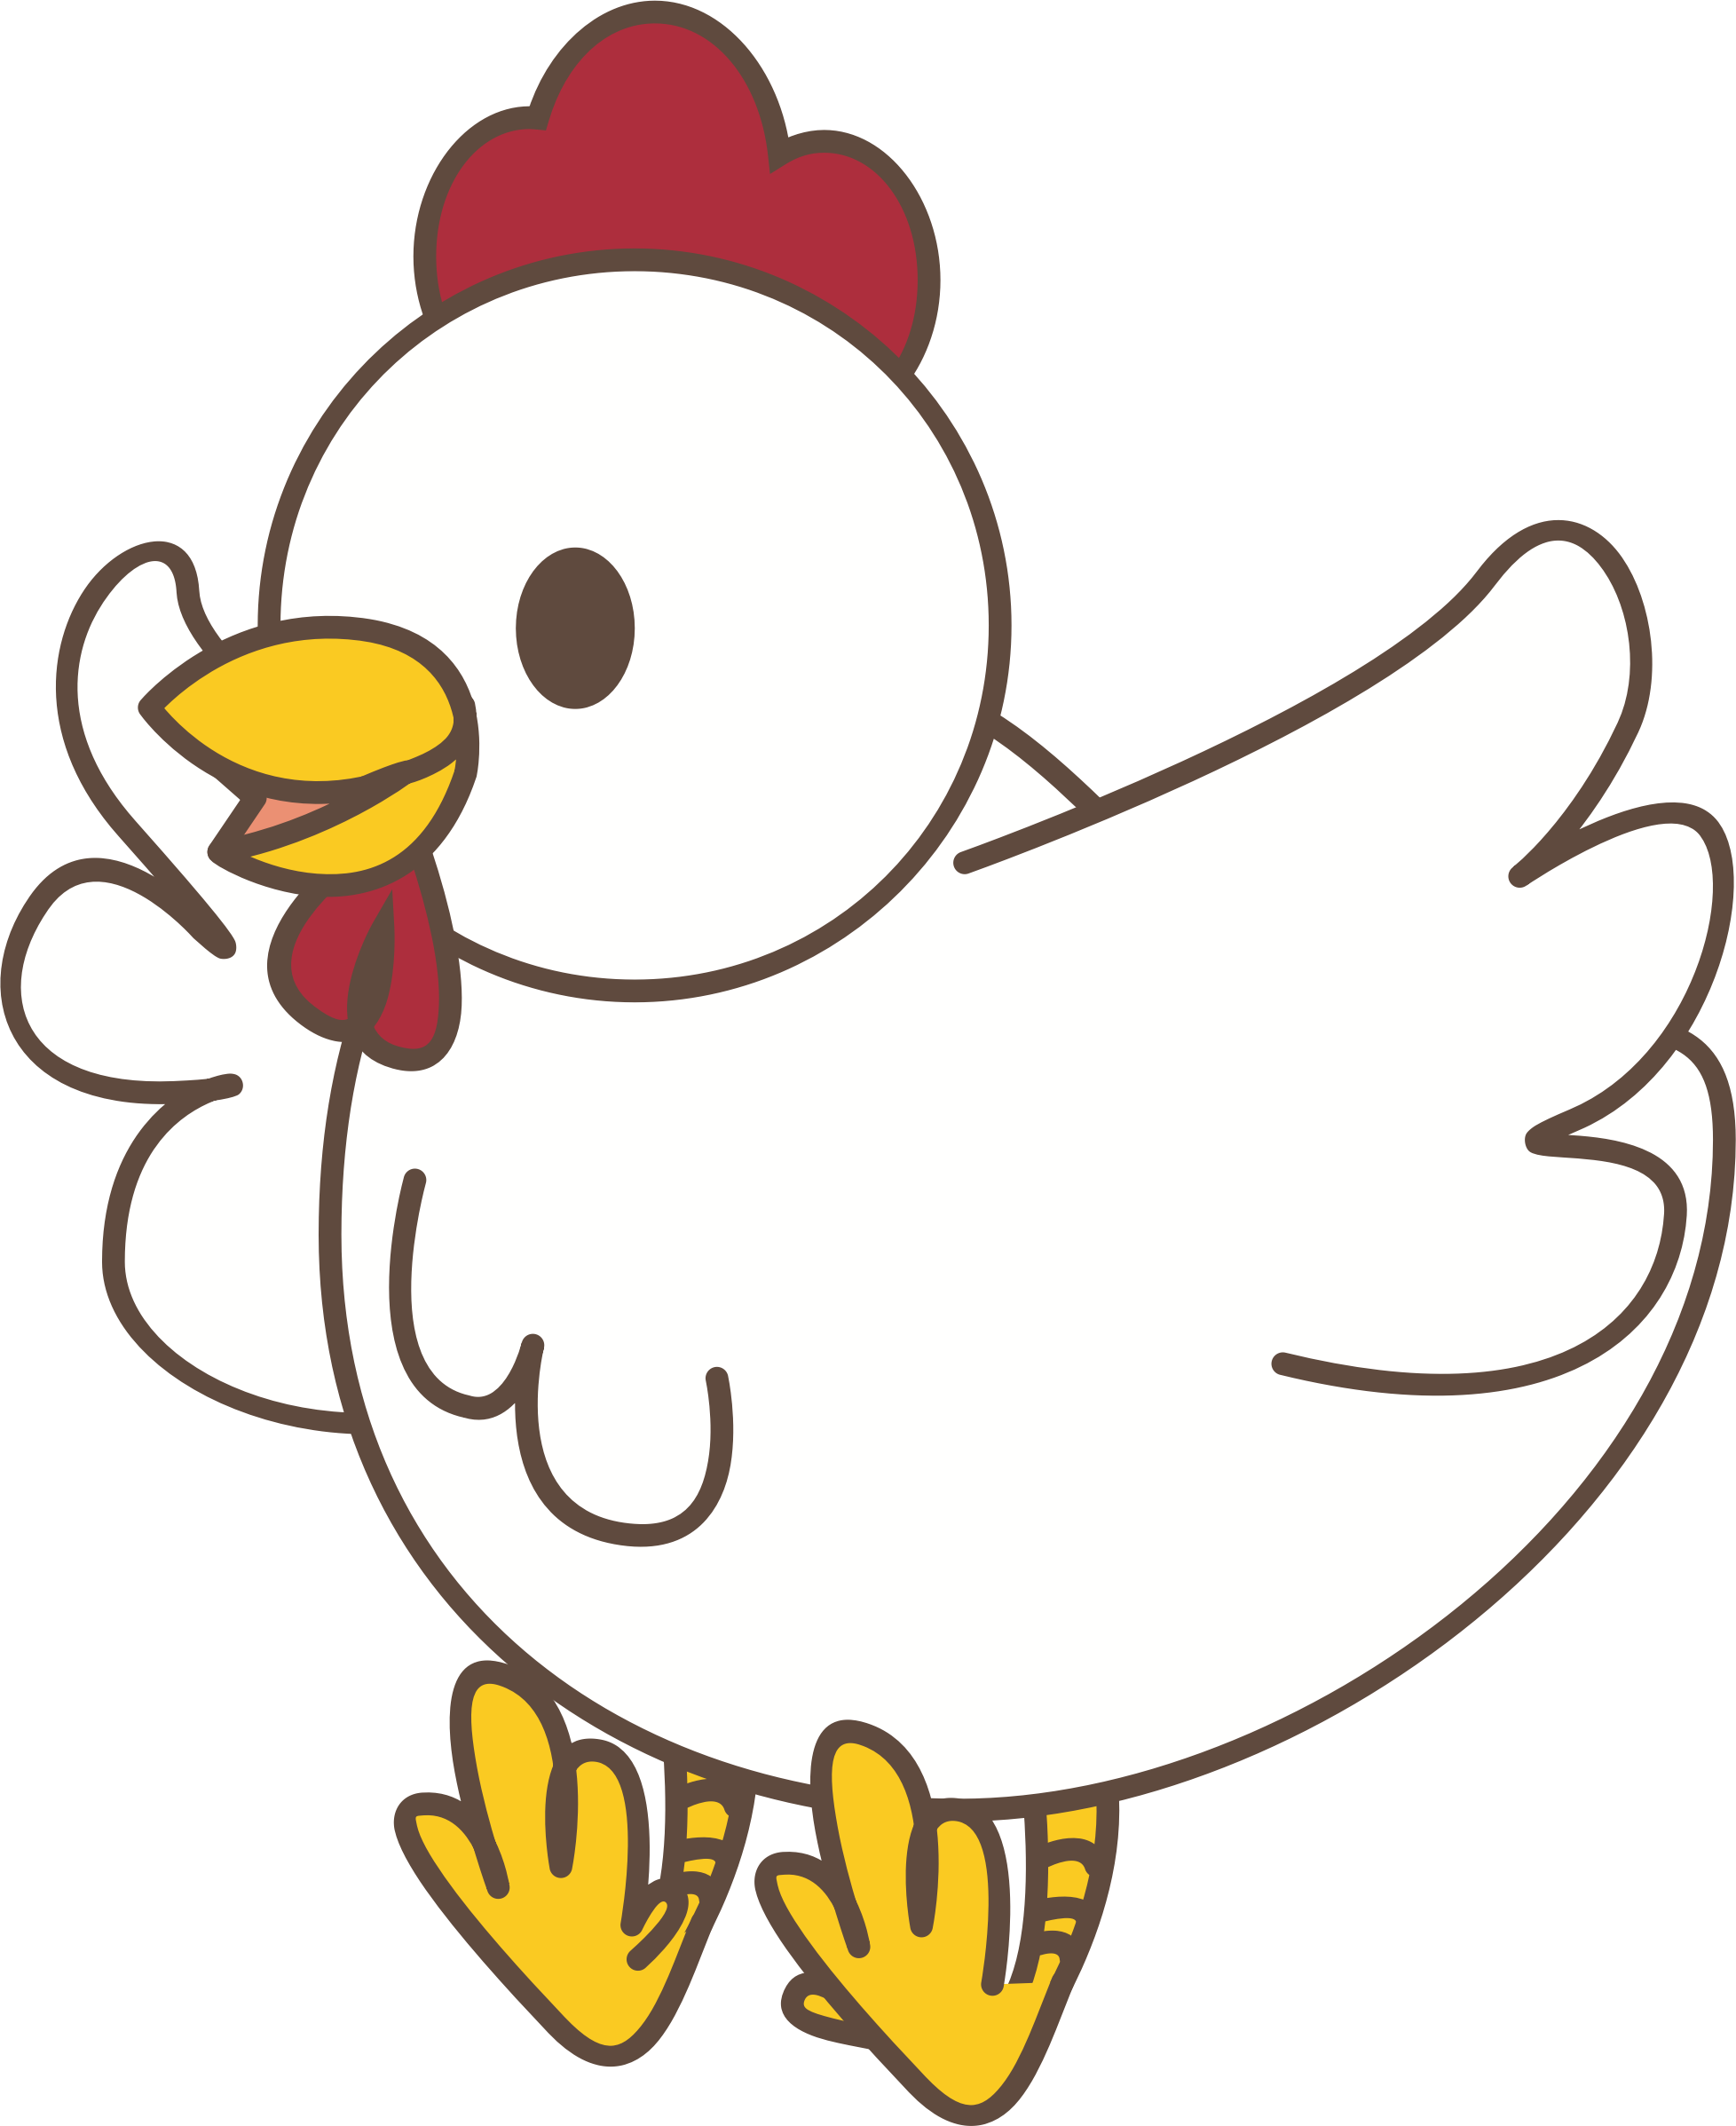 Chicken flapping wings big. Wing clipart cartoon